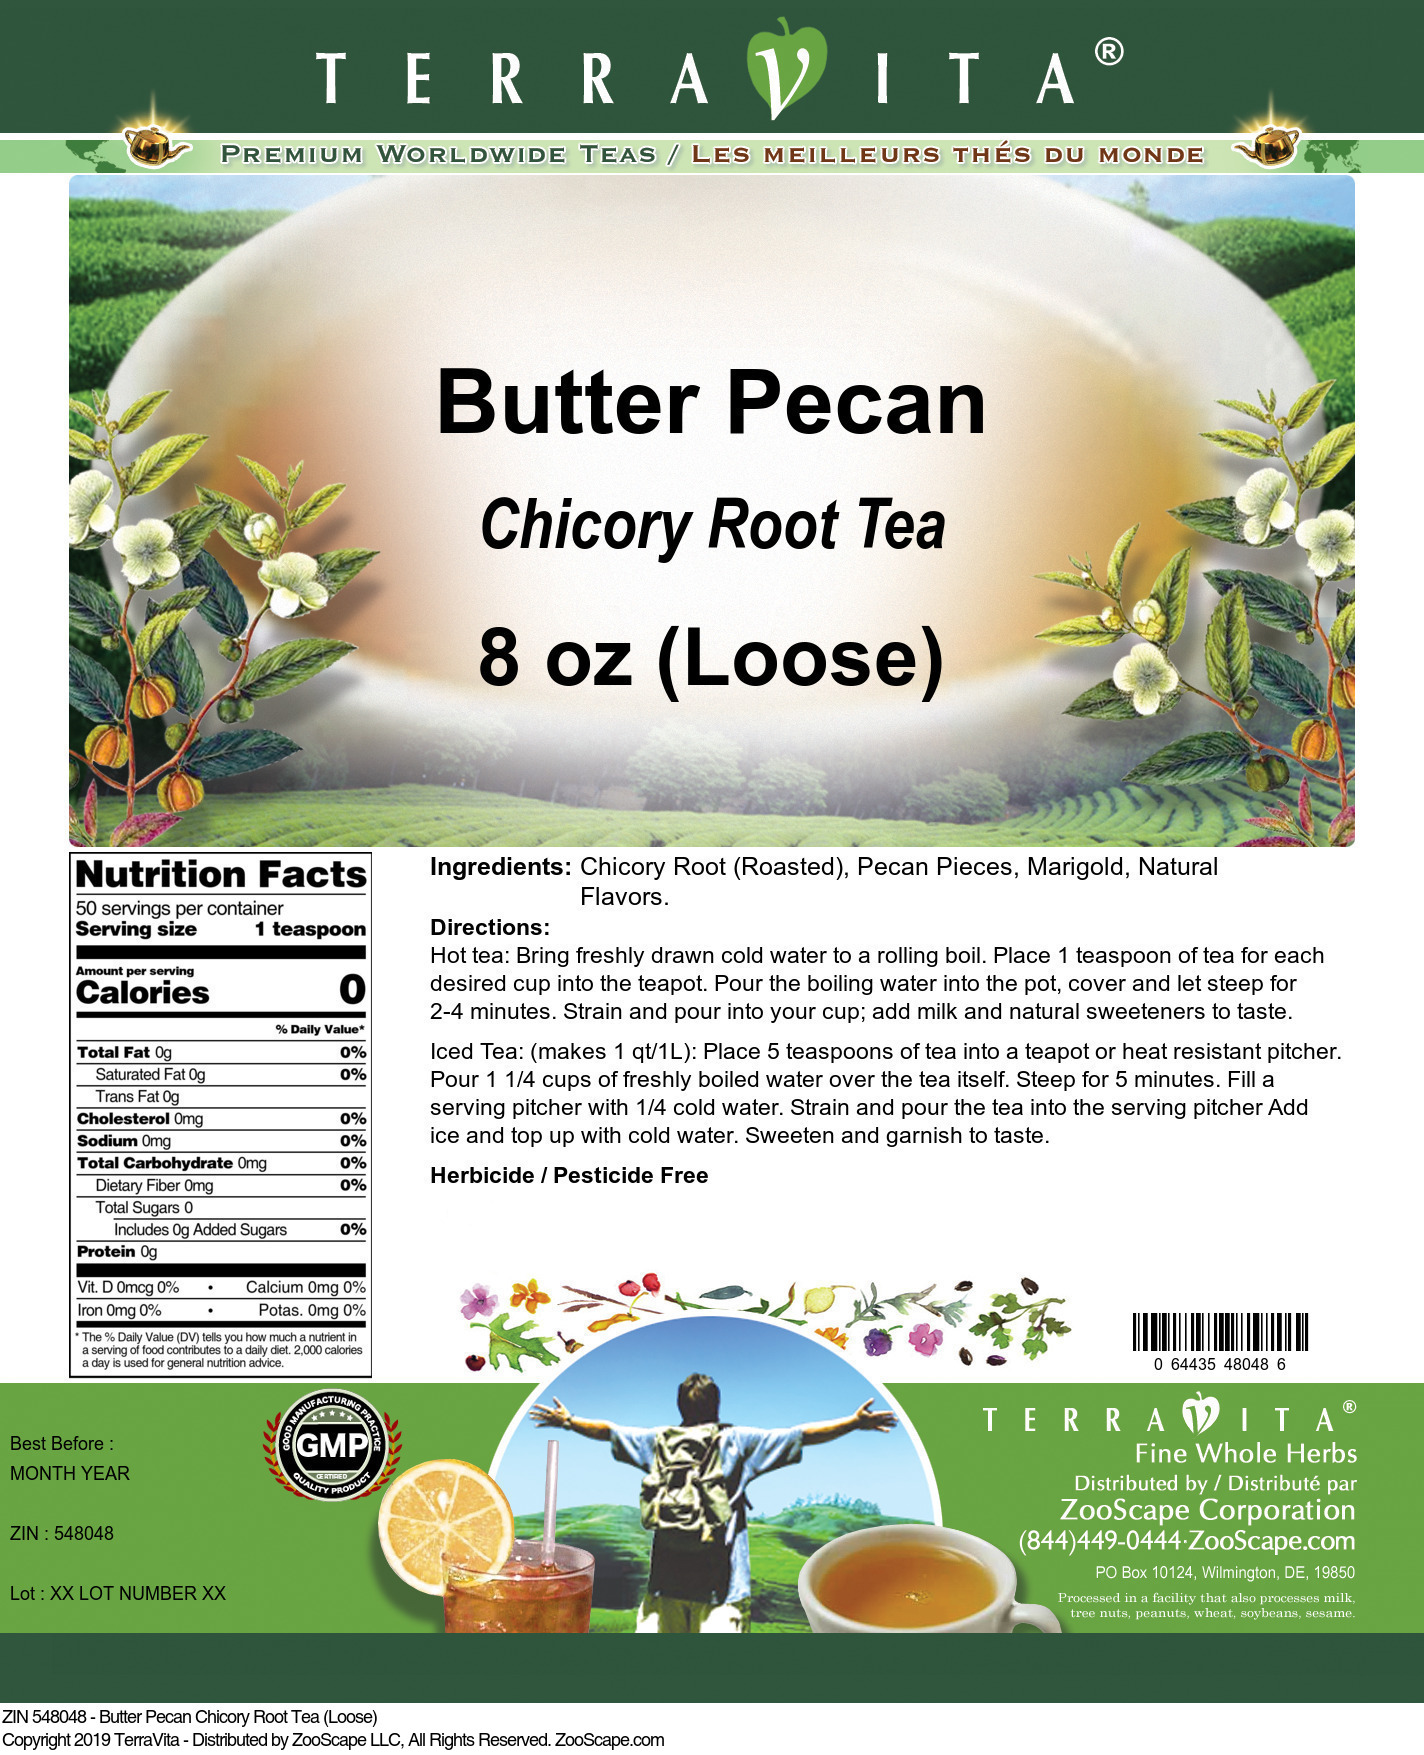 Butter Pecan Chicory Root Tea (Loose) - Label